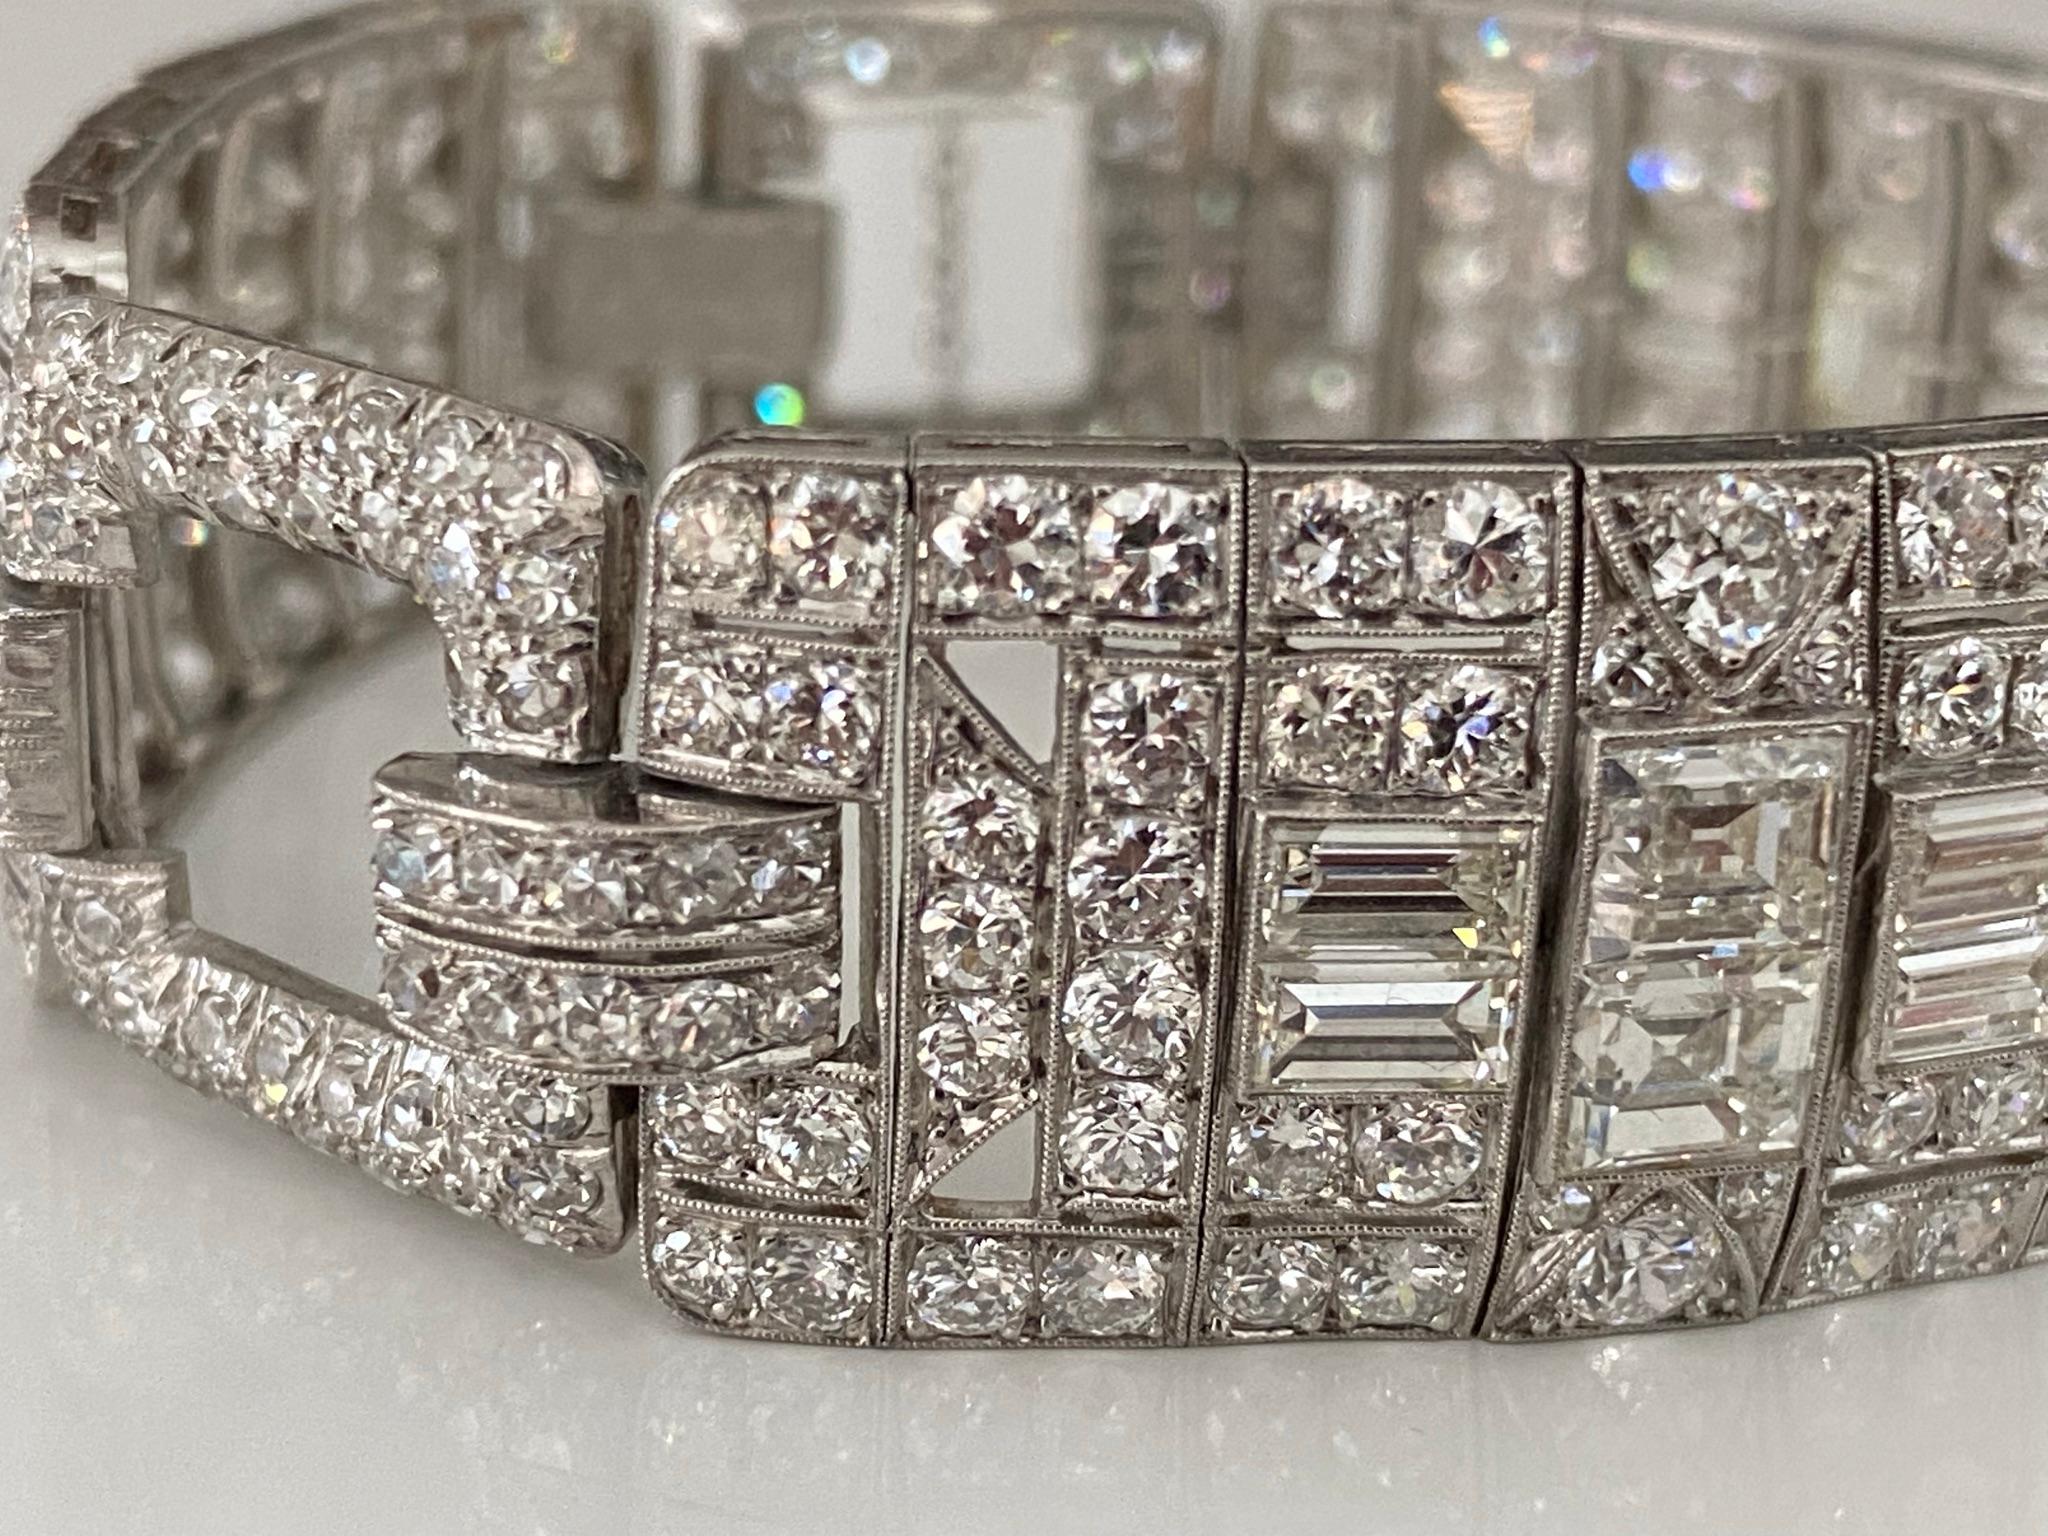 This magnificent Art Deco link bracelet handcrafted in platinum in the 1920s features a repeating geometric design adorned with an array of glistening emerald cut, Old European cut, single cut and baguette diamonds totaling approximately 20.00